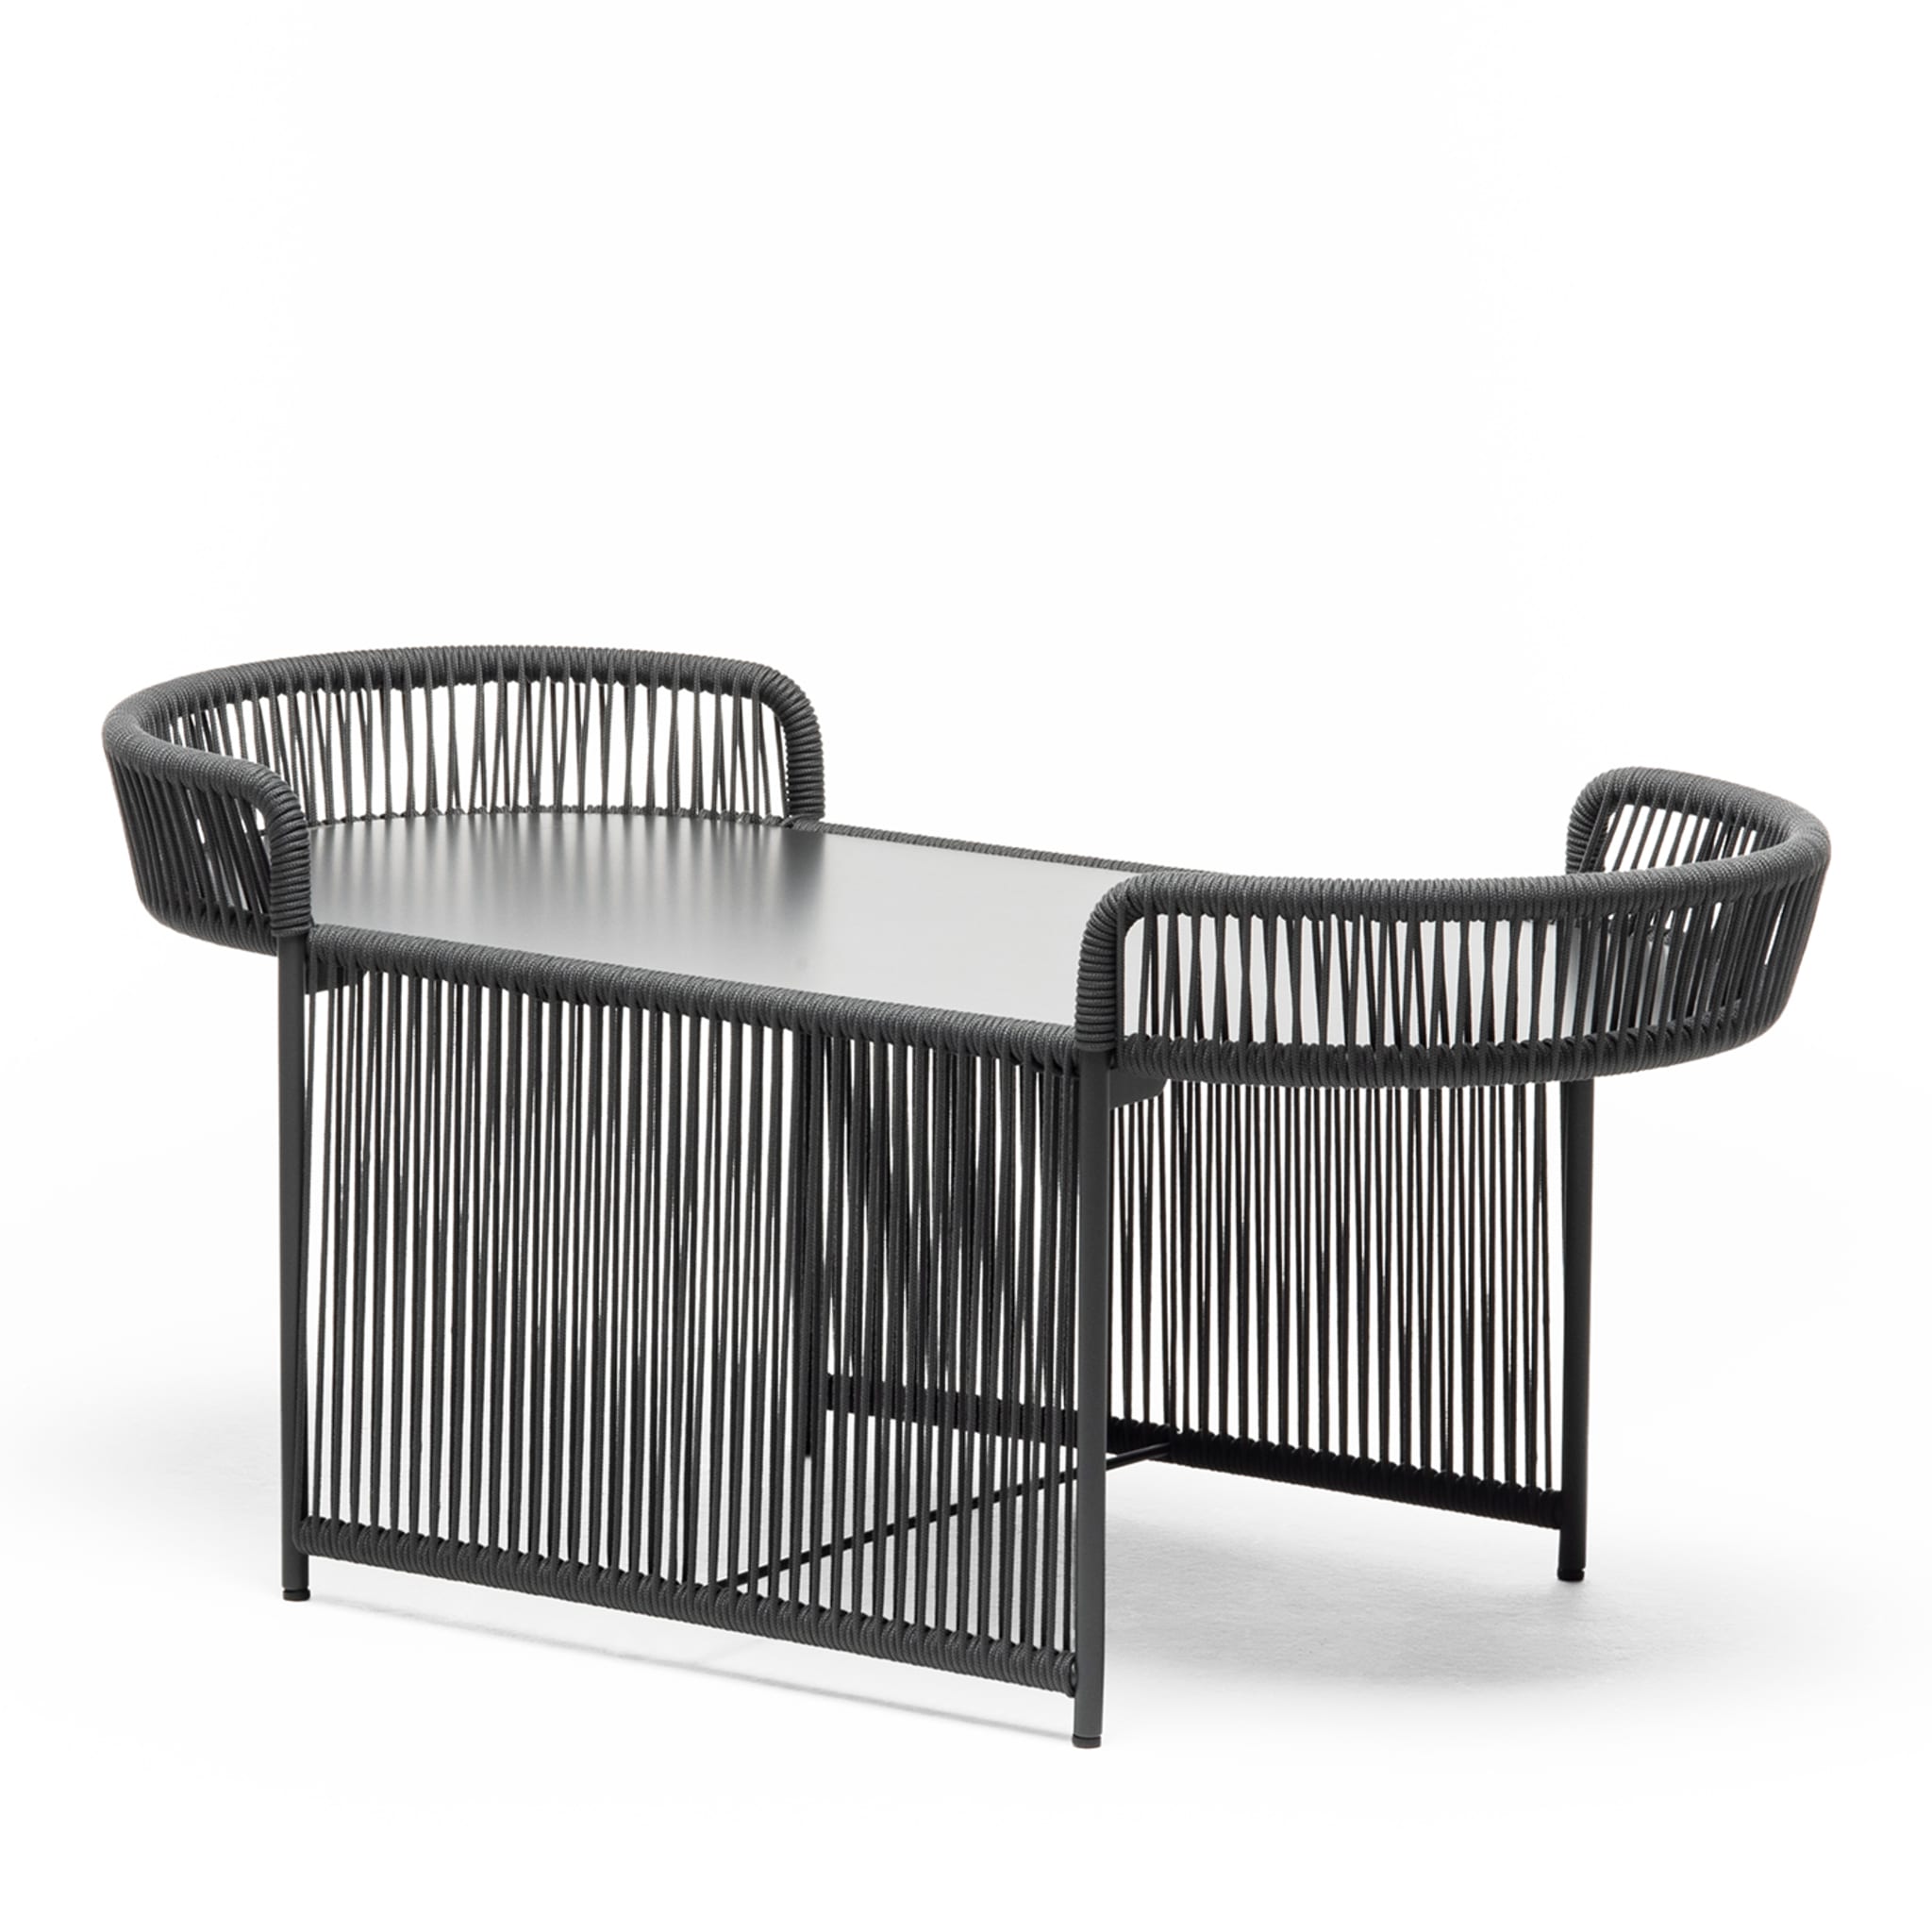 Altana Oval Anthracite Coffee Table by Antonio De Marco - Alternative view 1